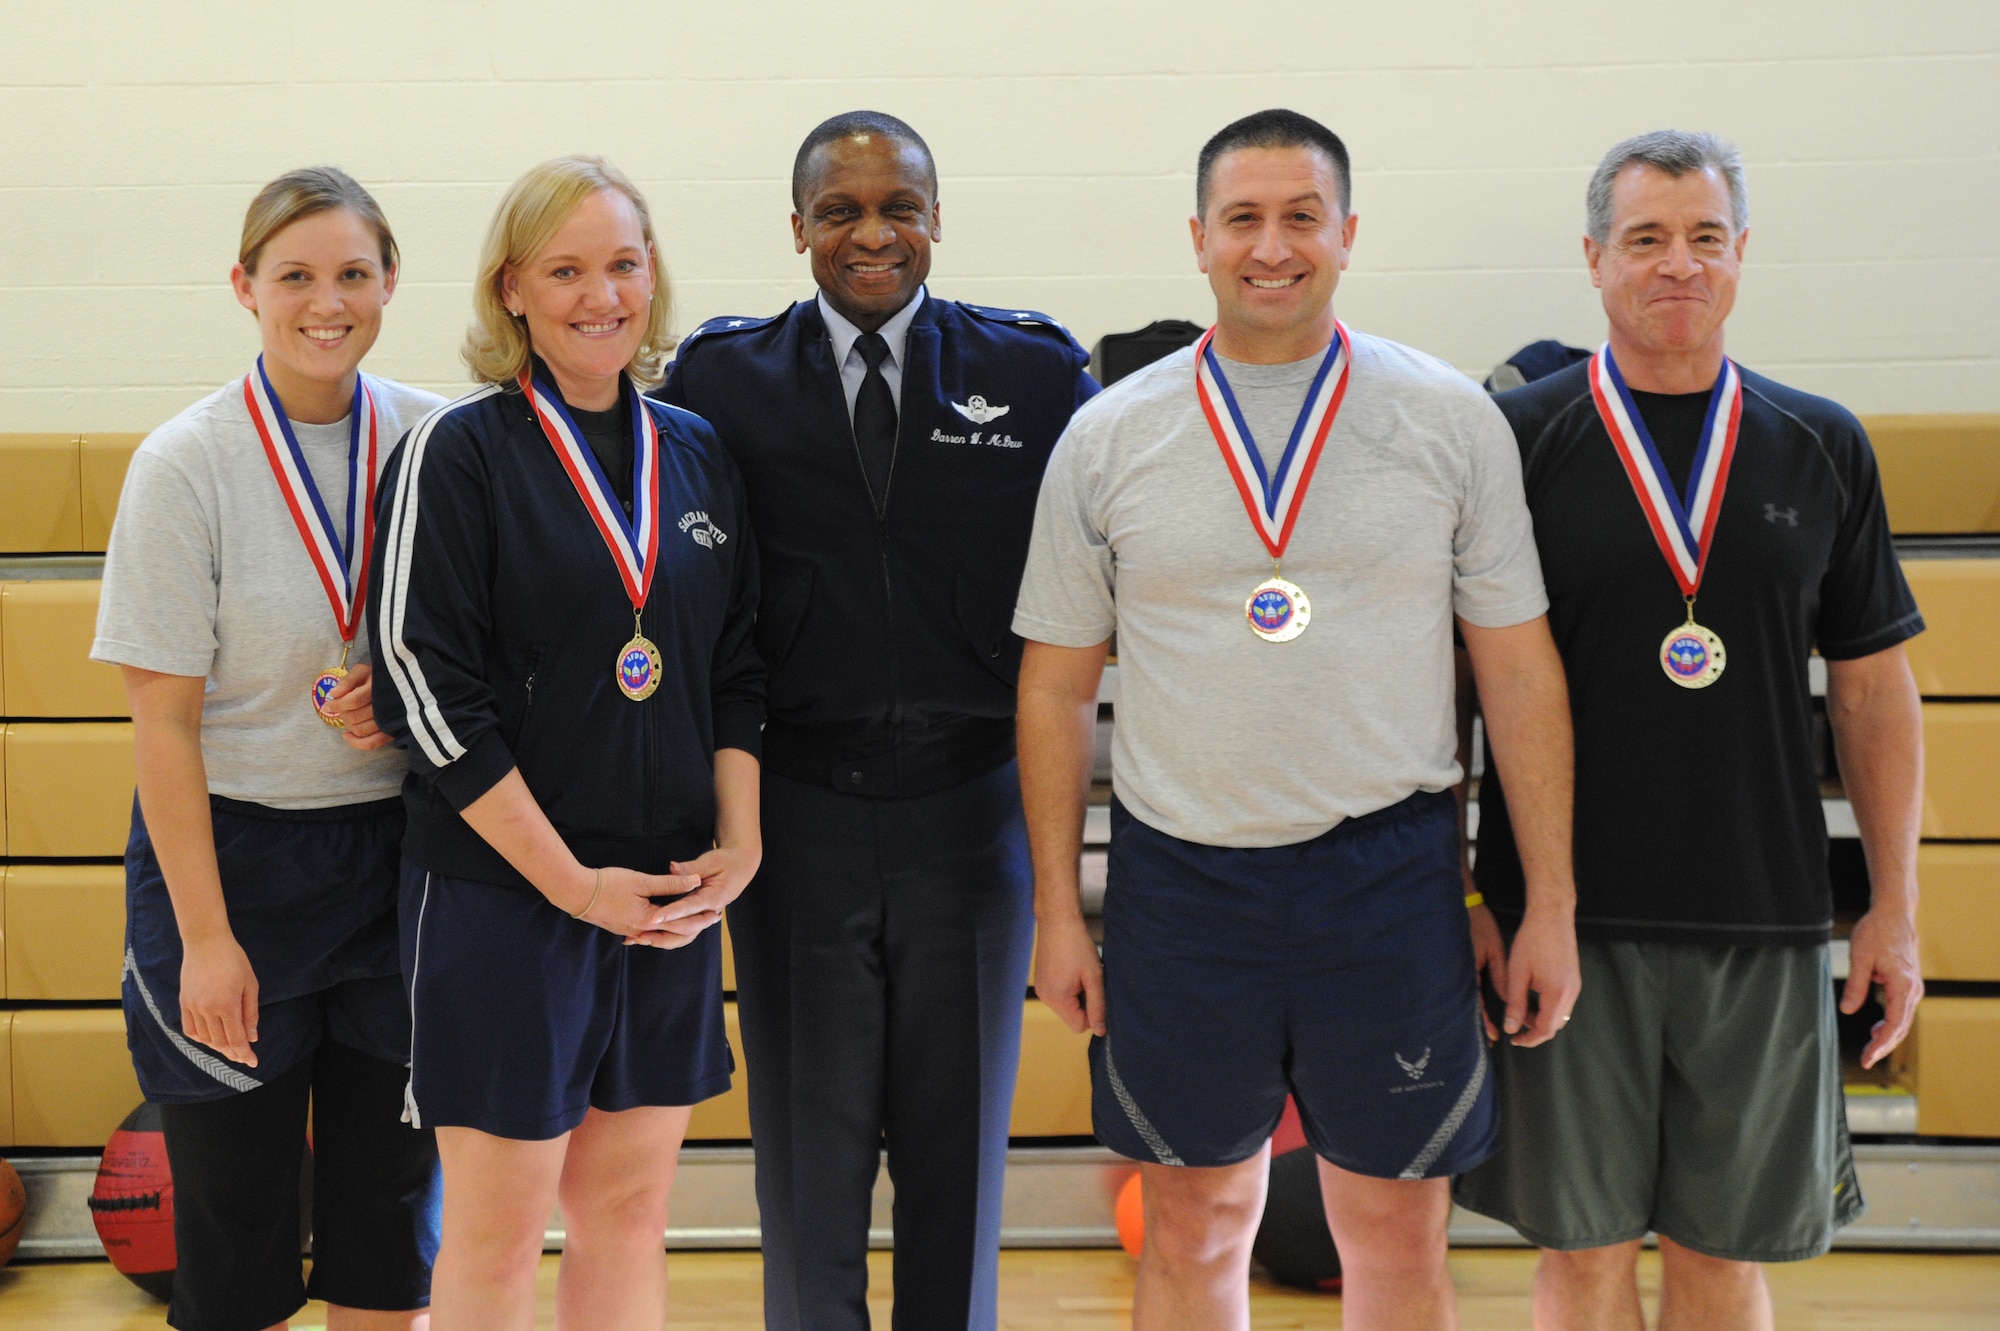 Air Force District of Washington Commander Maj. Gen. Darren W. McDew
congratulates Team Cops Plus One March 1 at the West Fitness Center, Joint
Base Andrews, Md. The team won the distance category in the February Fitness
Challenge, completing more than 15,580 feet. (U.S. Air Force photo by Airman
1st Class Tabitha N. Haynes)
